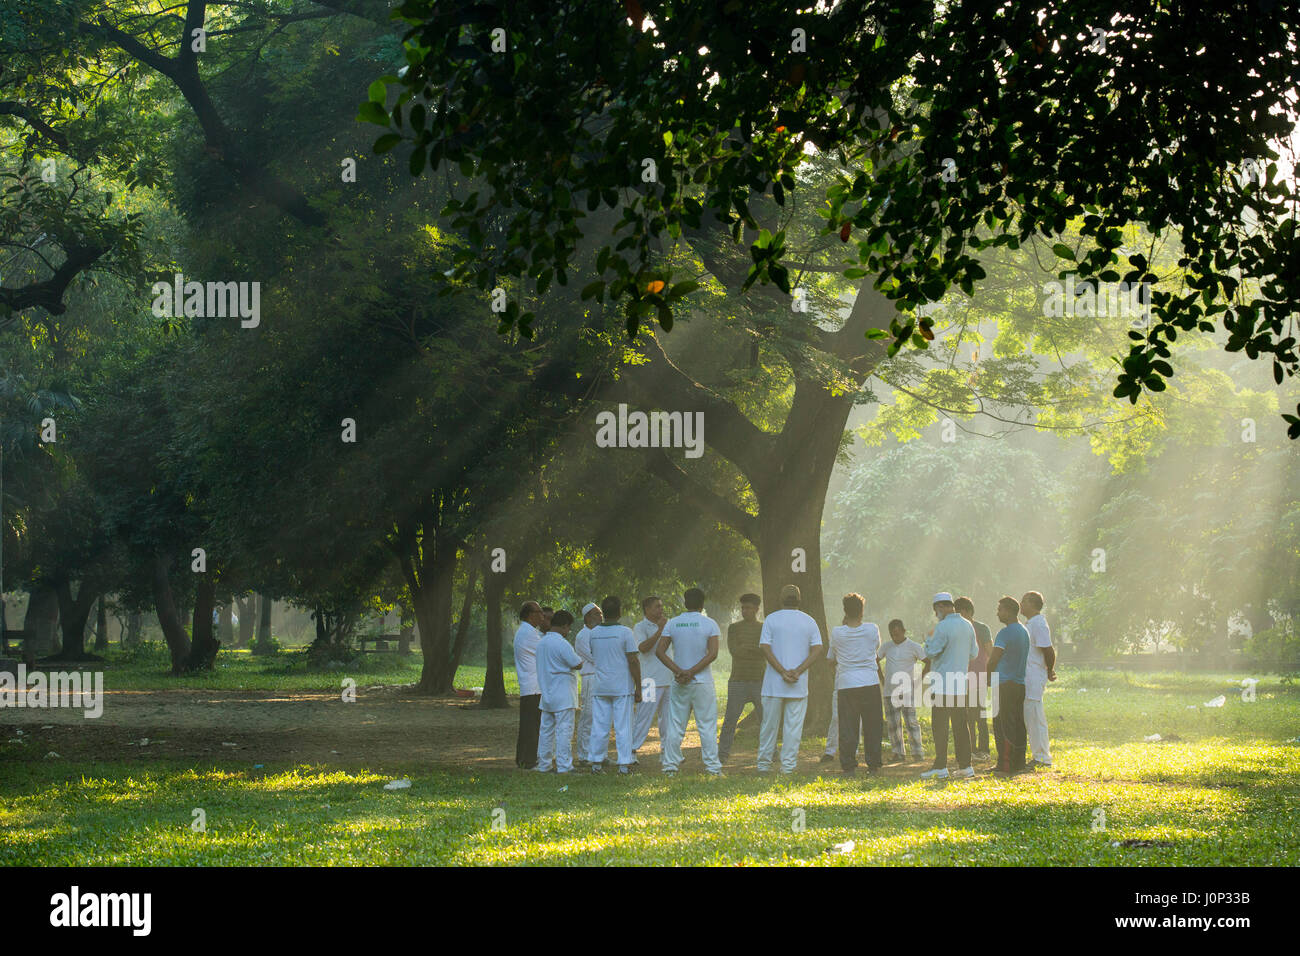 Dhaka residents exercise in the Ramna Park in a winter morning. Dhaka, Bangladesh. Stock Photo